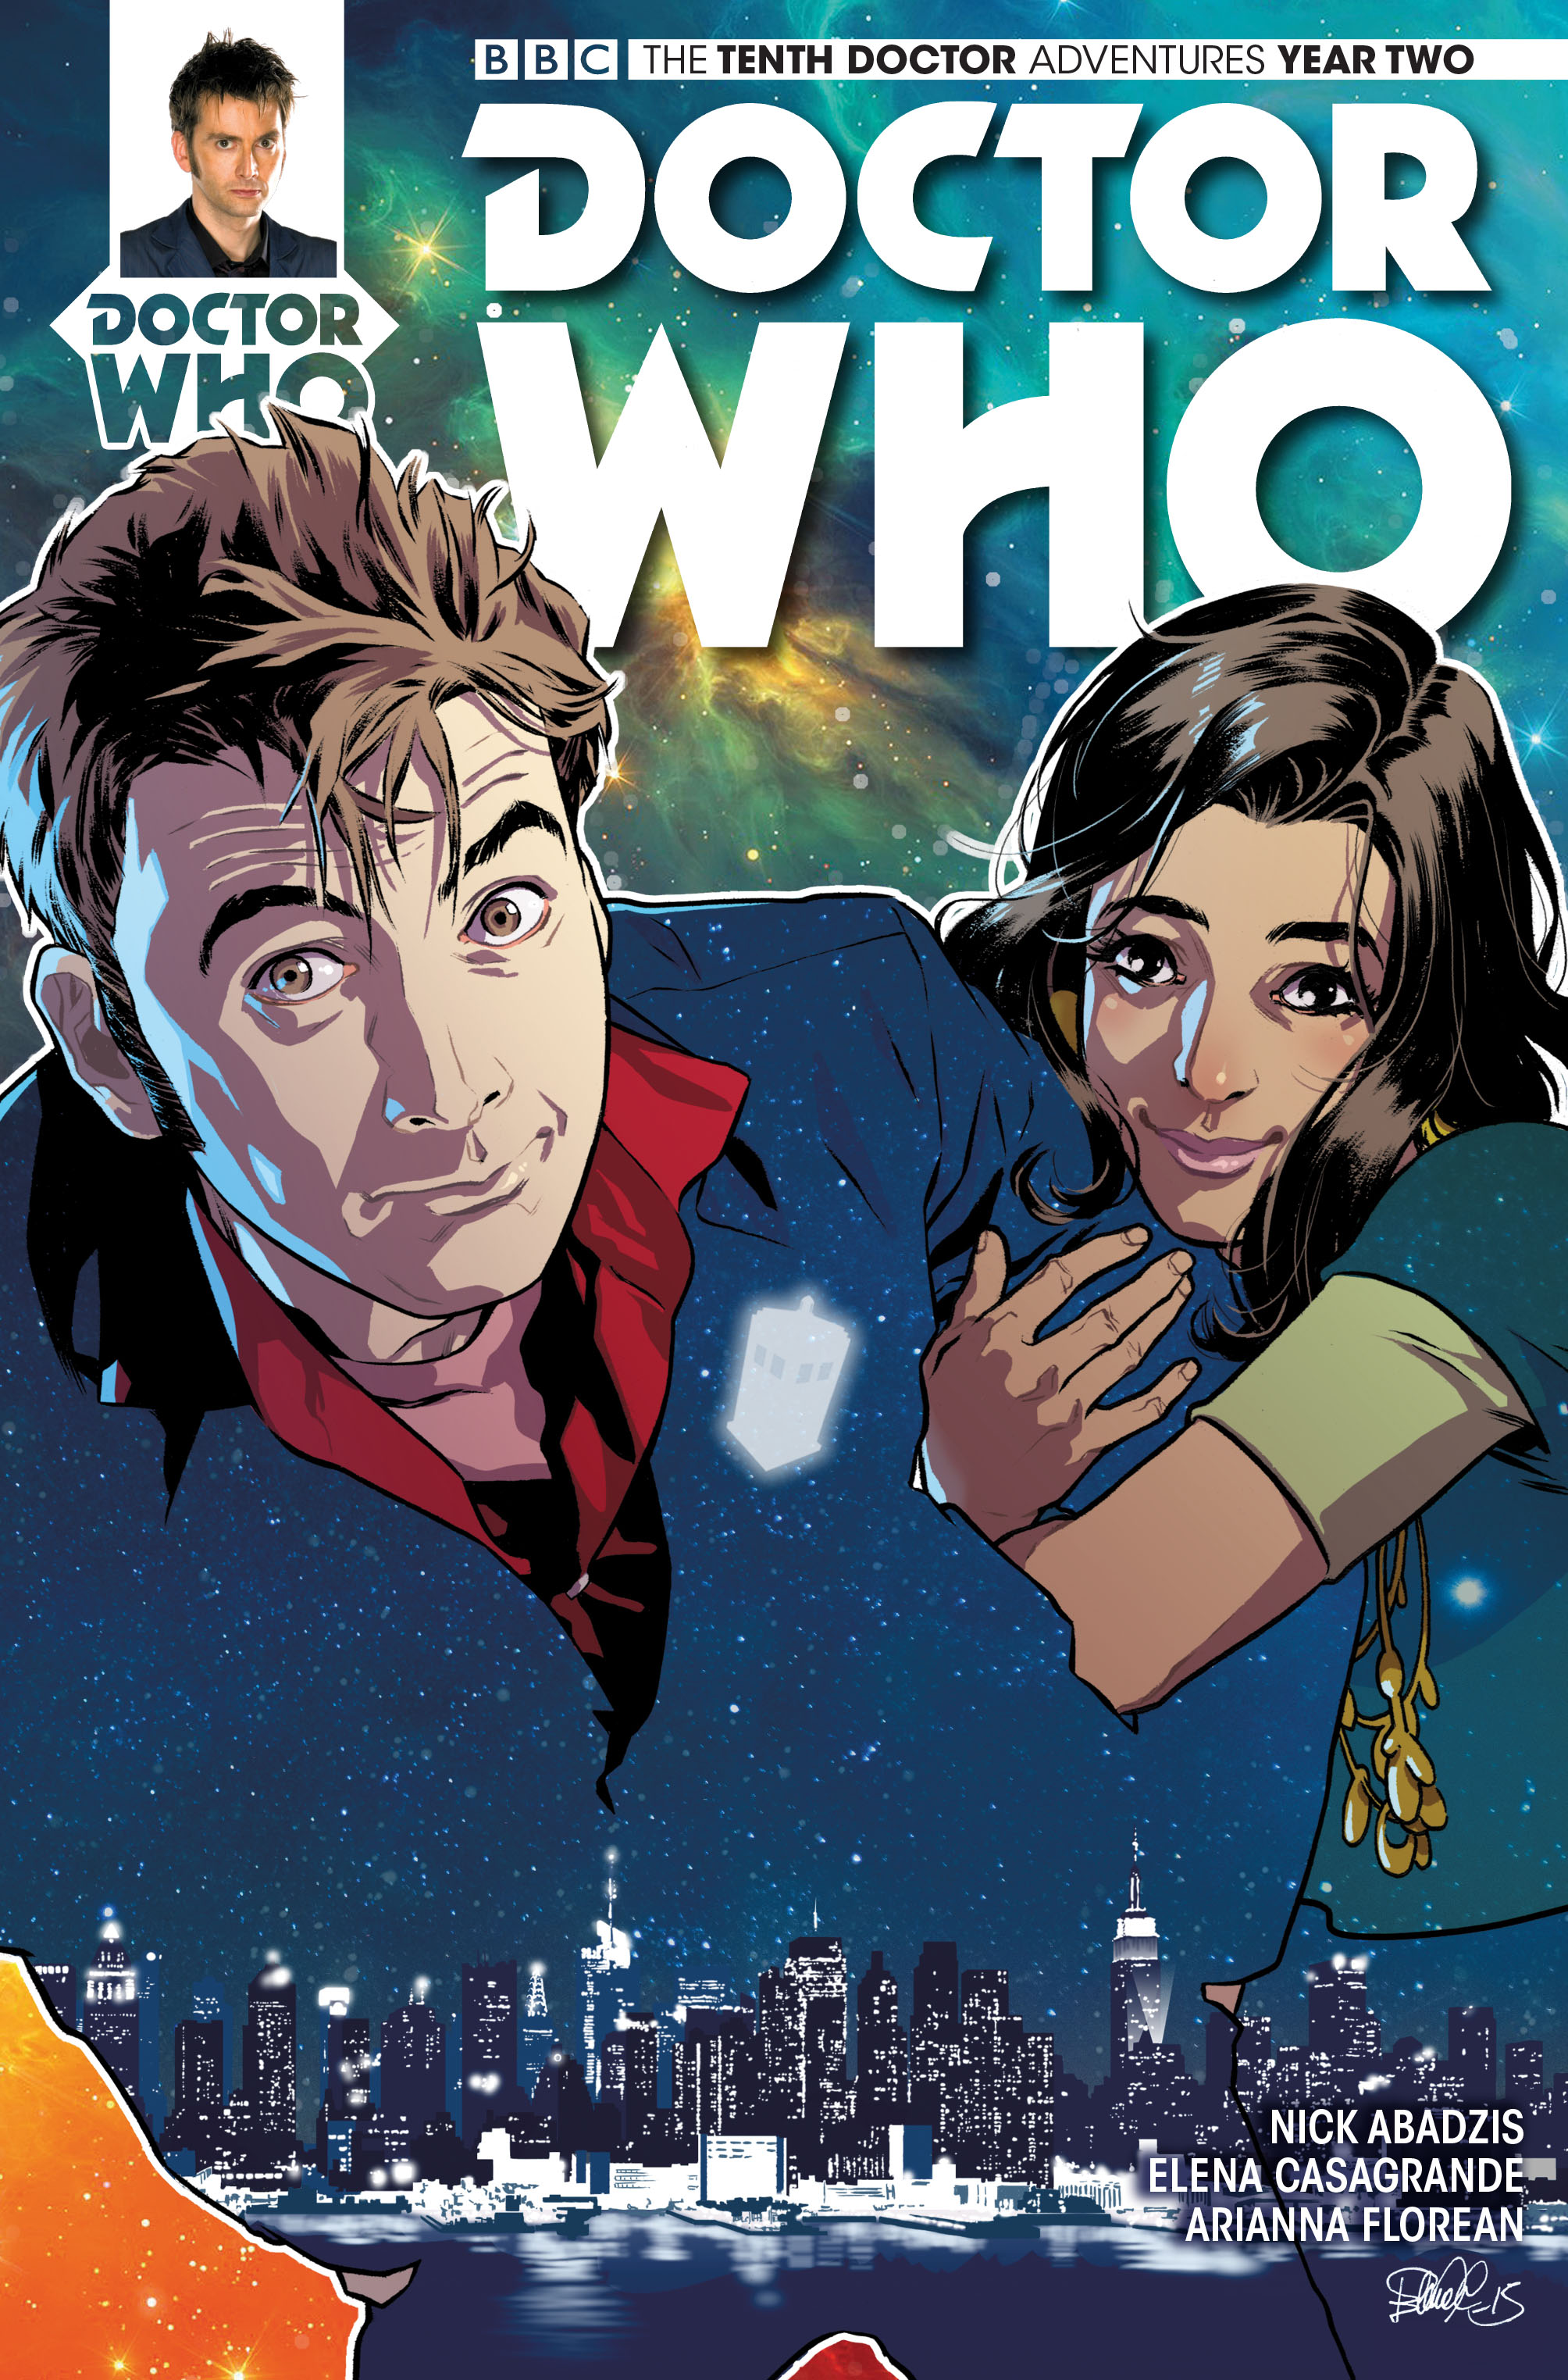 Doctor Who: The Tenth Doctor Year 2 #5 - Cover A